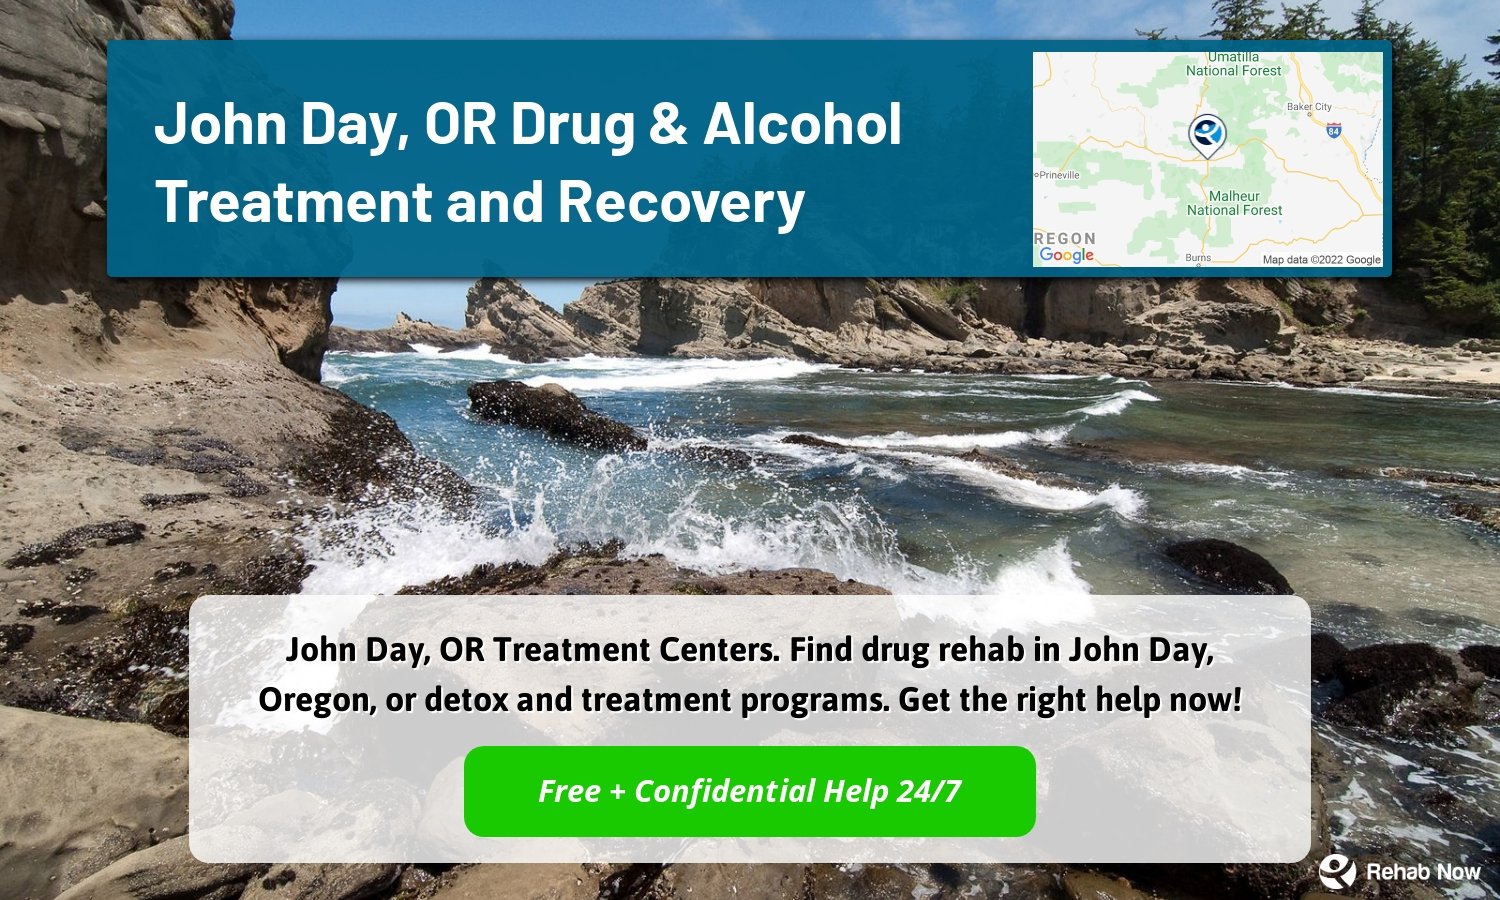 John Day, OR Treatment Centers. Find drug rehab in John Day, Oregon, or detox and treatment programs. Get the right help now!